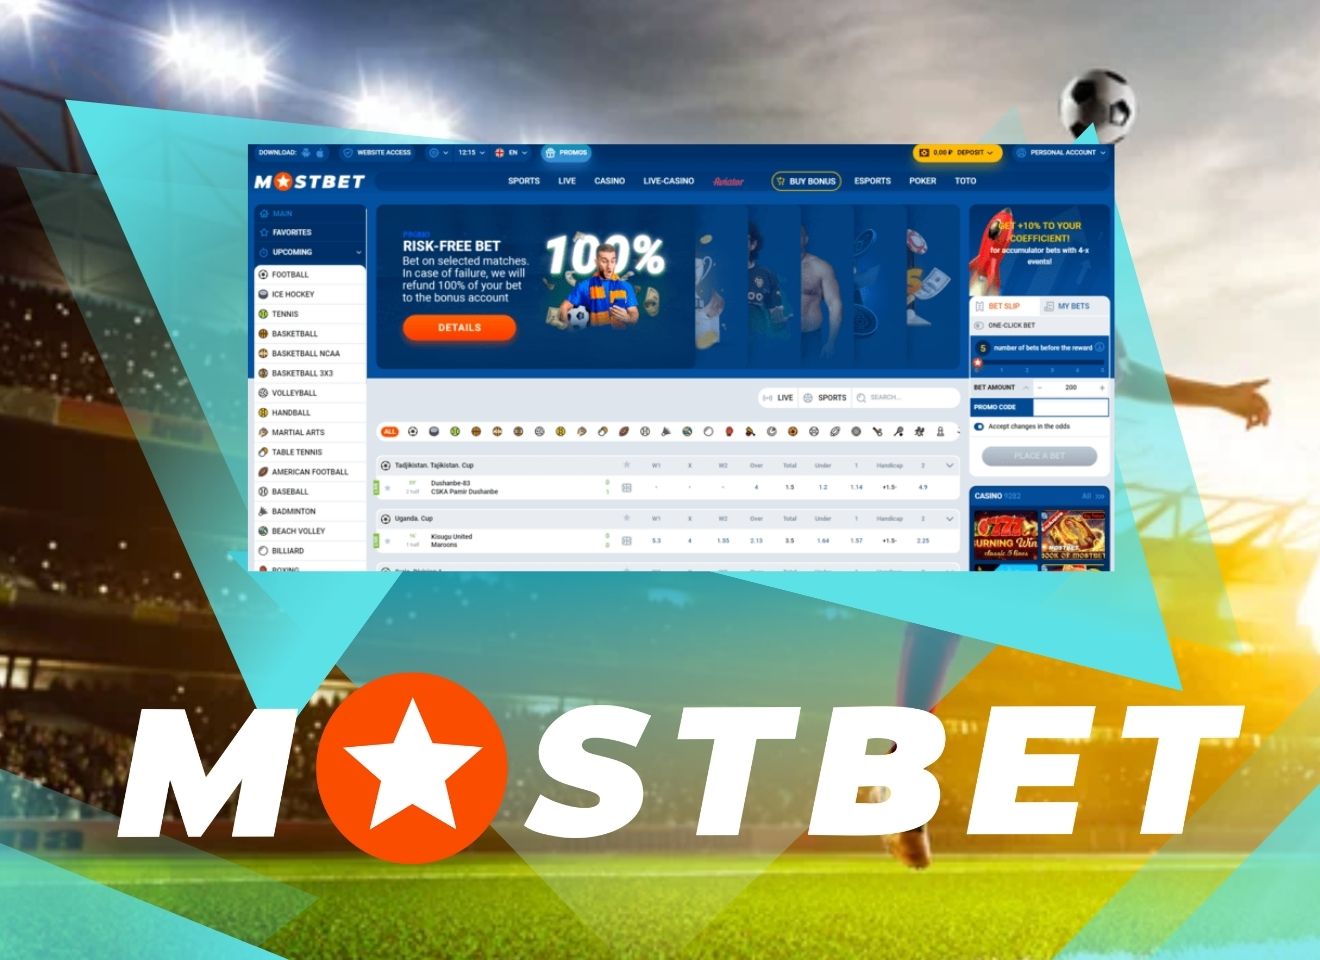 How to bet on the official site of Mostbet bookmaker